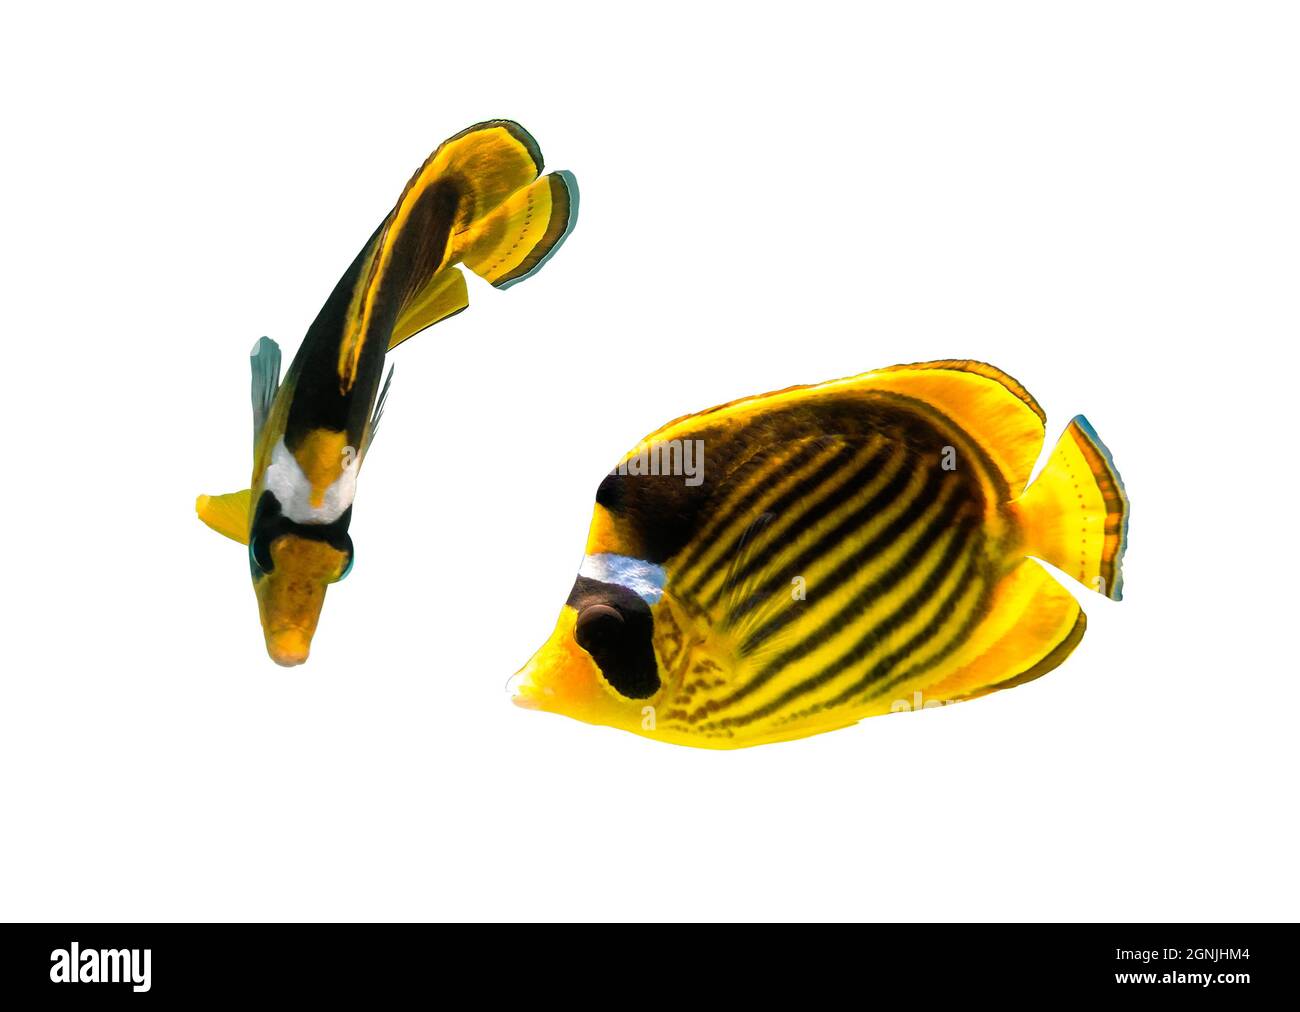 Pair of Raccoon Butterflyfish (Chaetodon lunula, crescent-masked, moon butterflyfish) isolated on white background. Two tropical fish with black and y Stock Photo